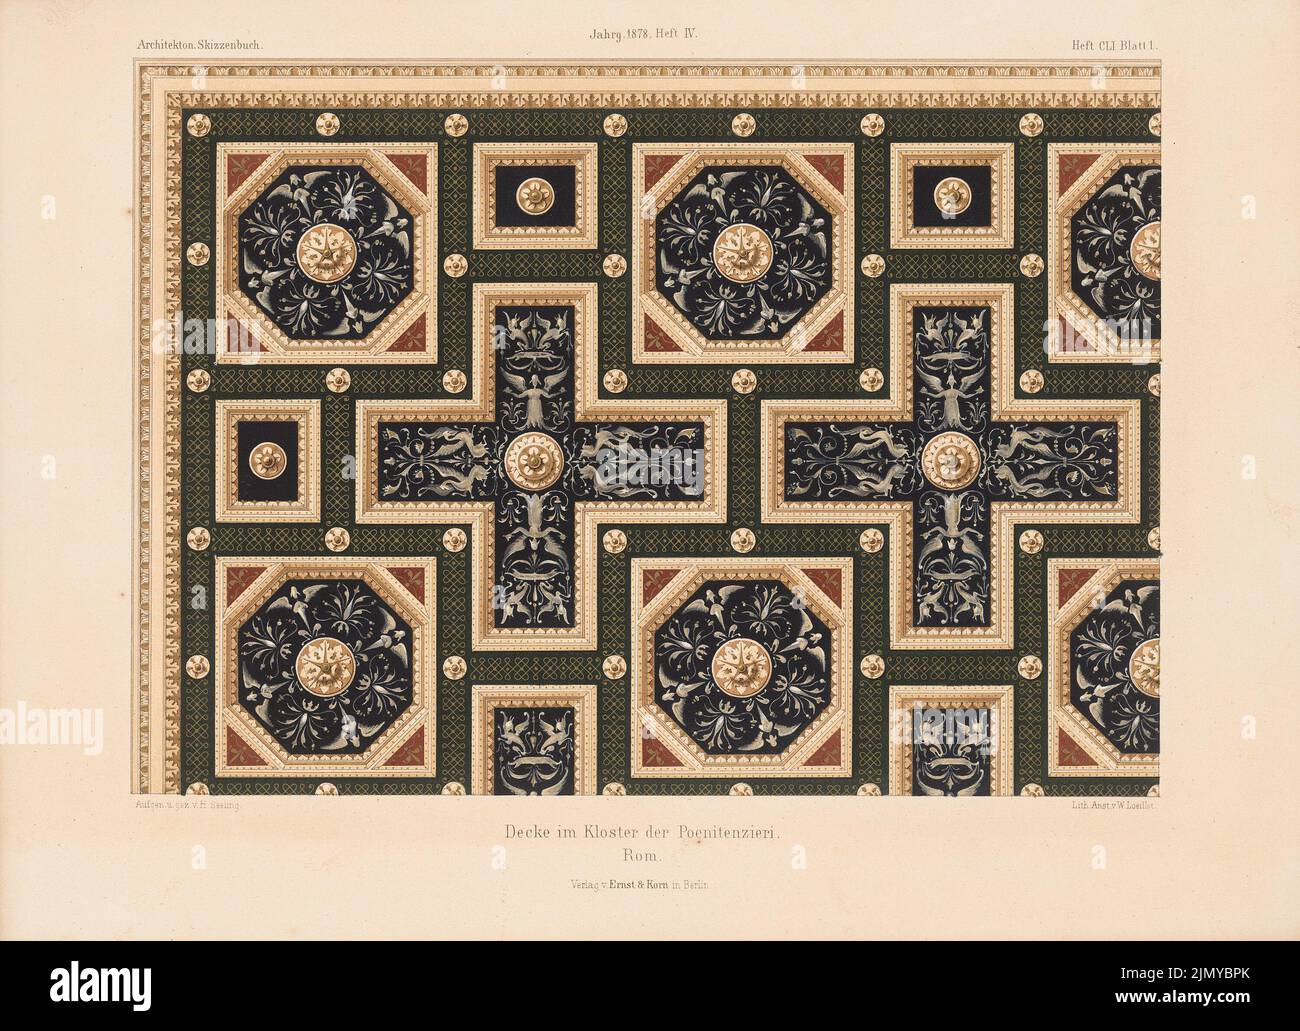 Seeling Heinrich (1852-1932), monastery ceiling, Rome. (From: Architectural sketchbook, H. 151/4, 1878.) (1878-1878): View. Lithography colored on paper, 25.4 x 35.1 cm (including scan edges) Stock Photo